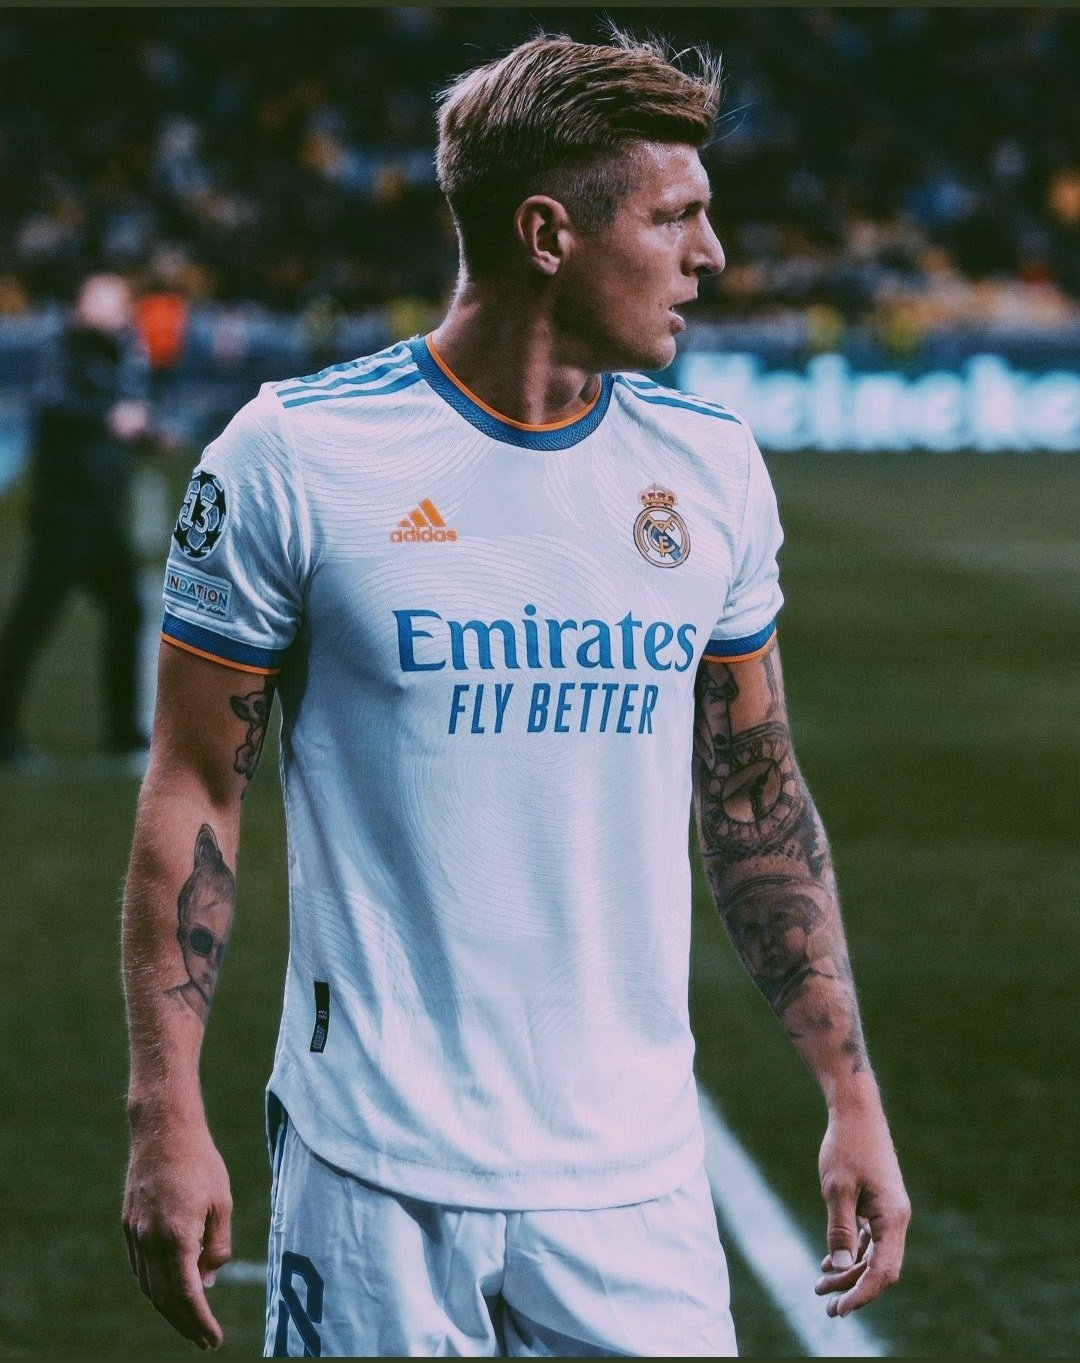 One of the greatest midfielders of this generation.

Happy Birthday, Toni Kroos.   